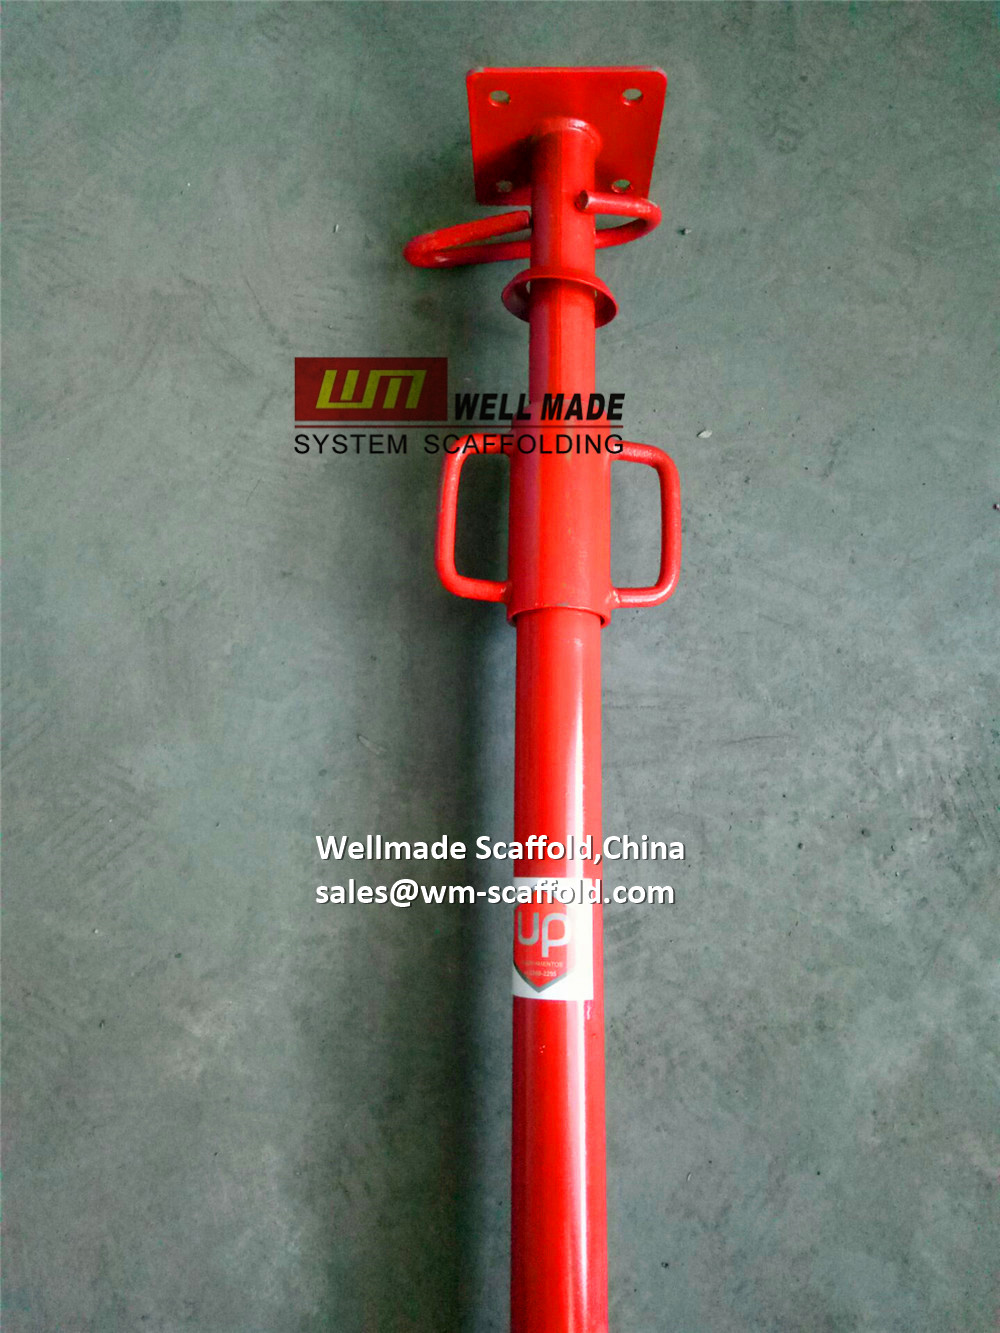 adjustable shoring jacks scaffolding temporary support slab formwork post poles-construction beam formwork table form work sales at wm-scaffold.com wellmade scaffold china lead scaffolding oem manufacturer  